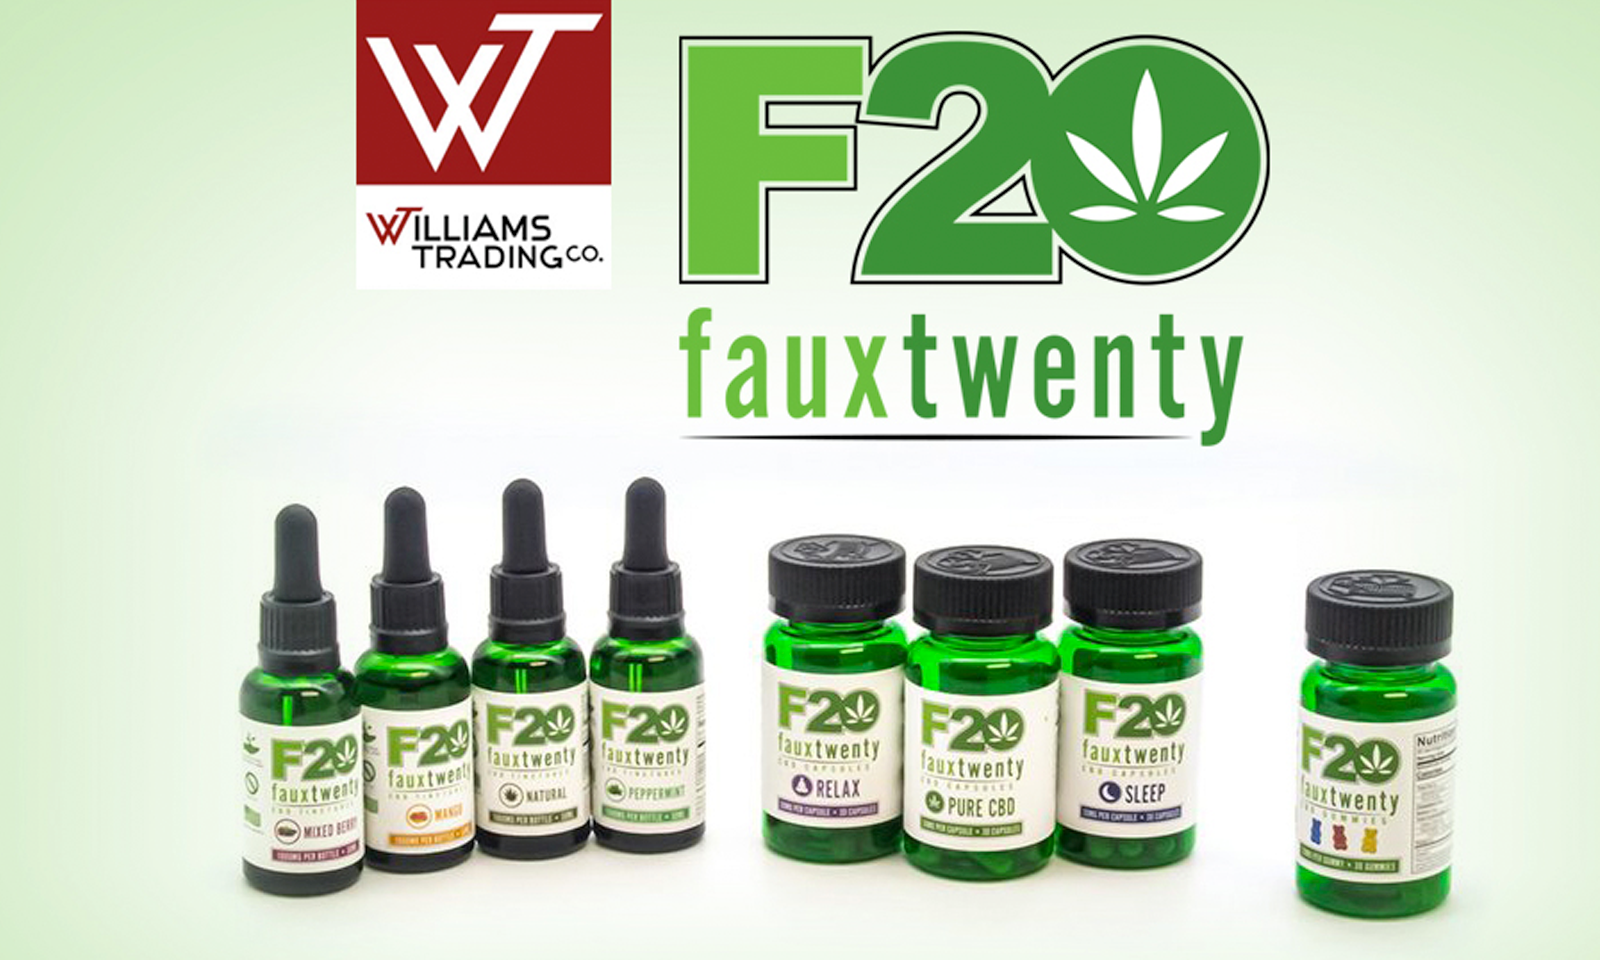 Williams Trading Carrying Products from Faux 20 CBD